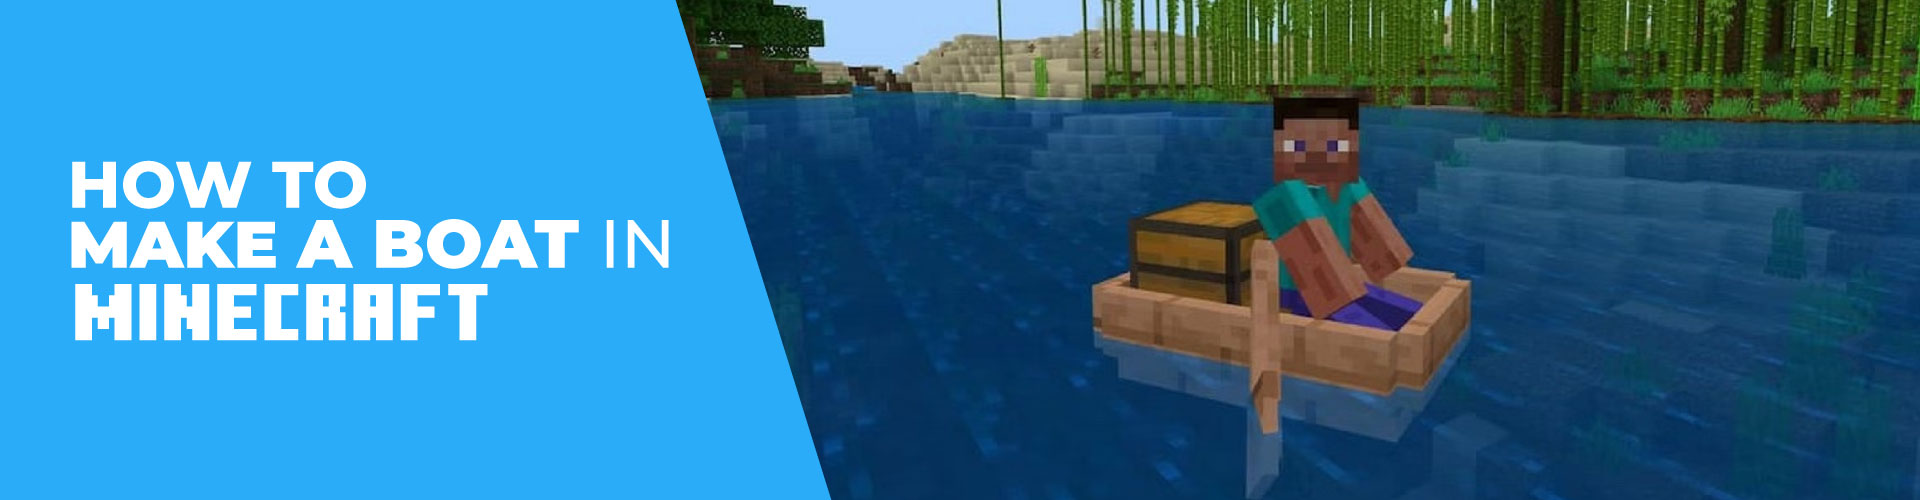 How To Make a Boat In Minecraft